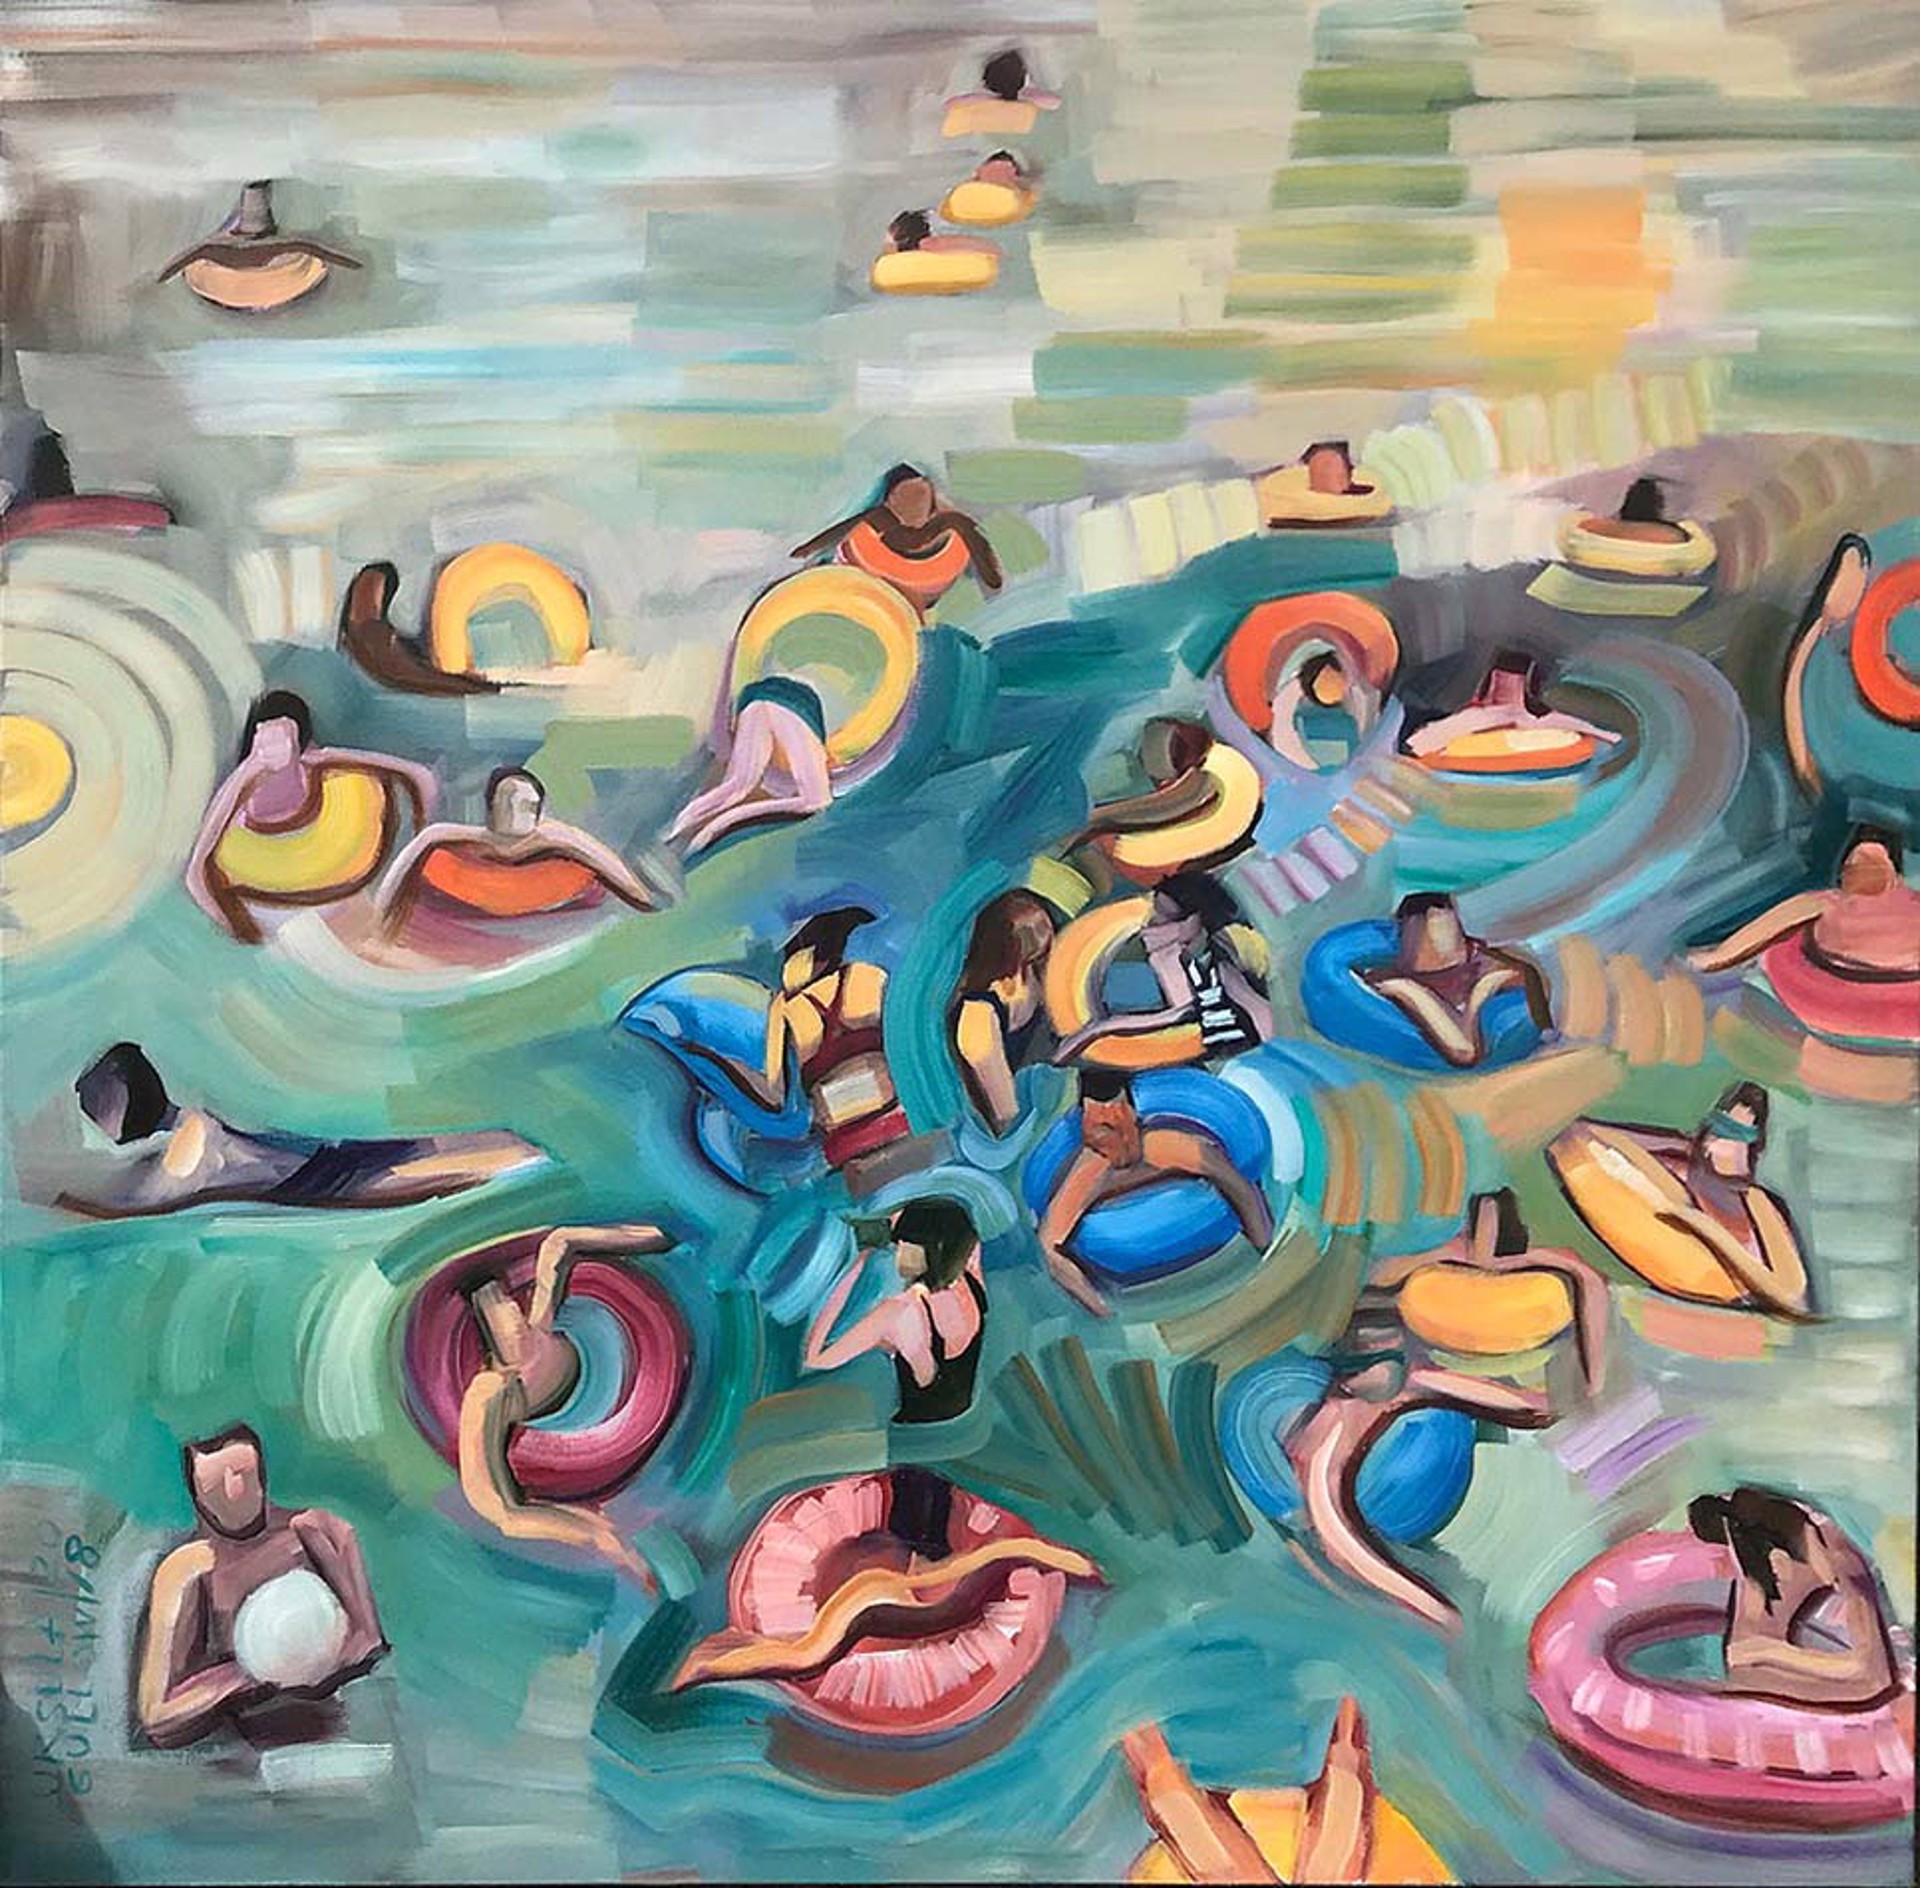 Tubing Time by Ursula Gullow